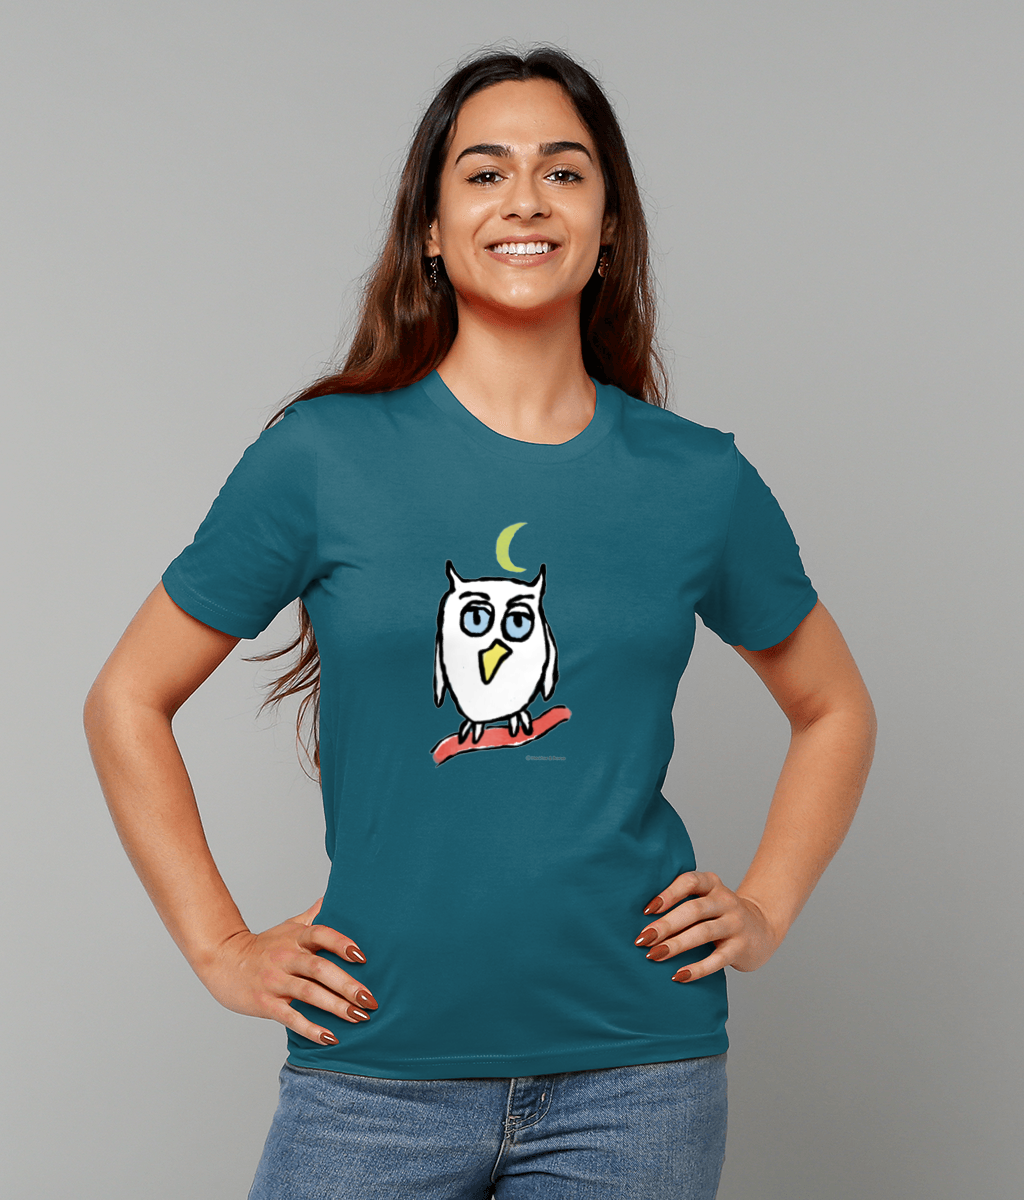 Owl T-shirt - Young woman wearing a night blue colour vegan cotton Night Owl T-shirt design by Hector and Bone